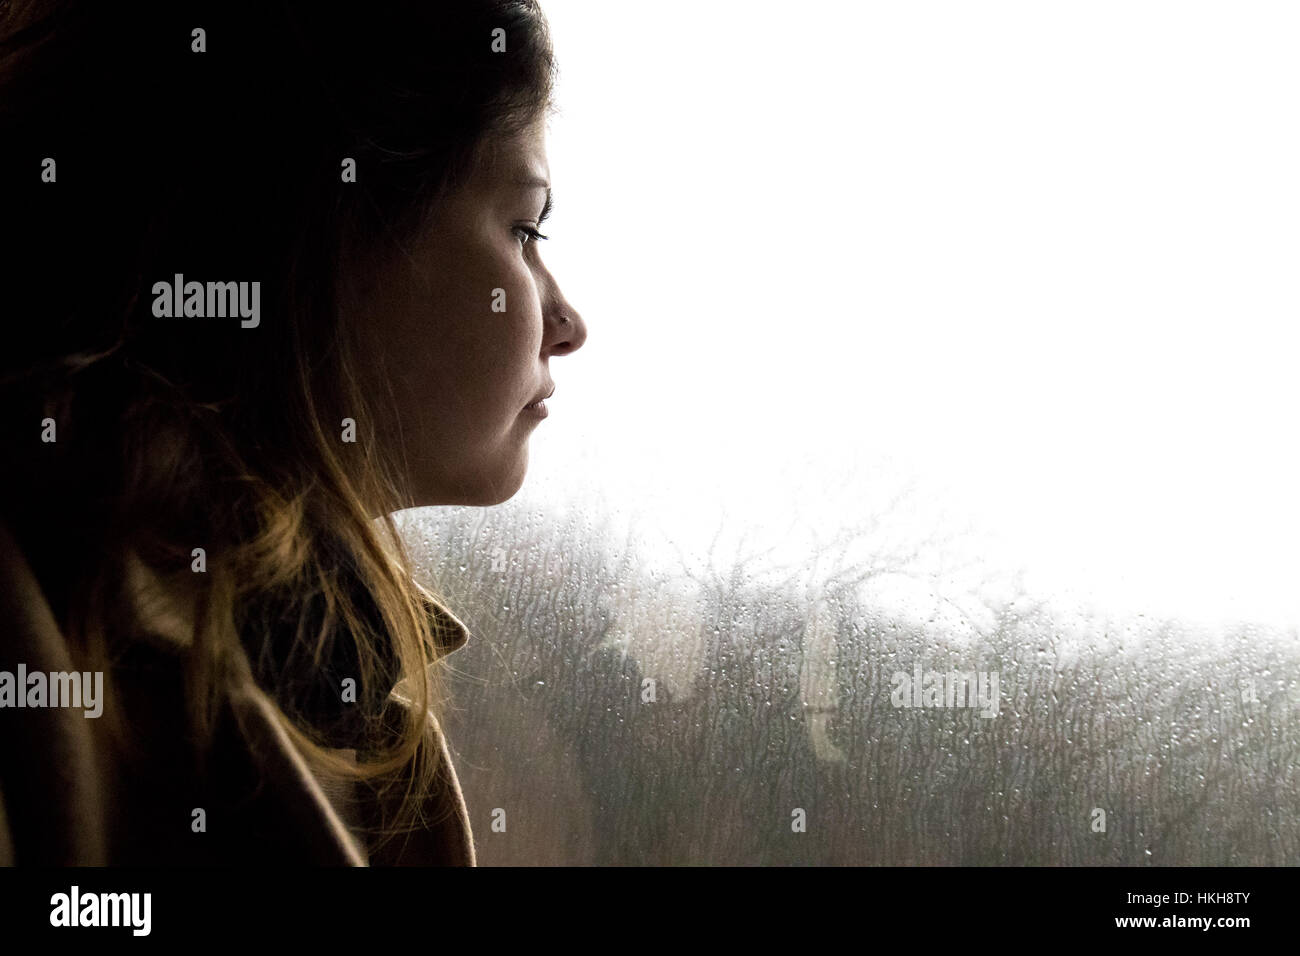 Beautifull girl looking at the bus window while is raining outside. Stock Photo